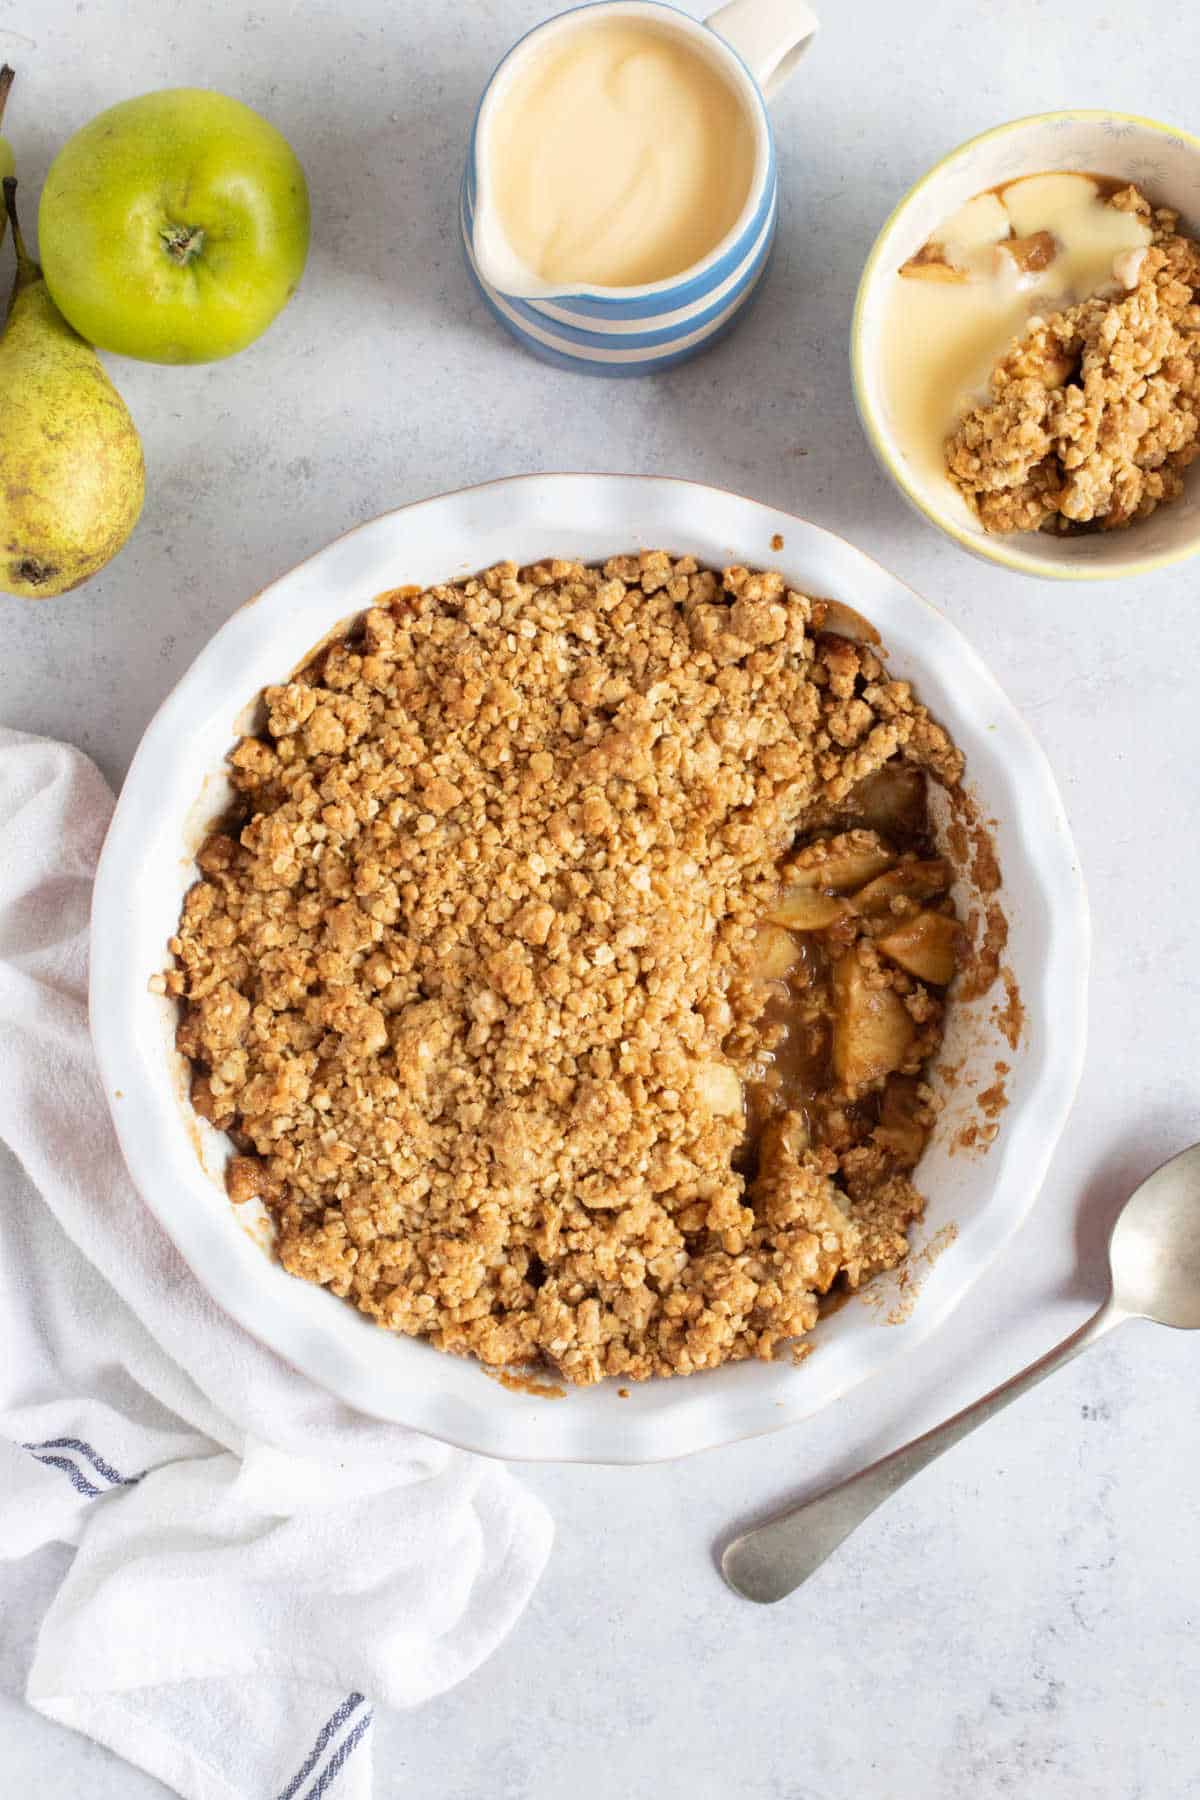 Apple and pear crumble wit ha crispy oat crumble topping.